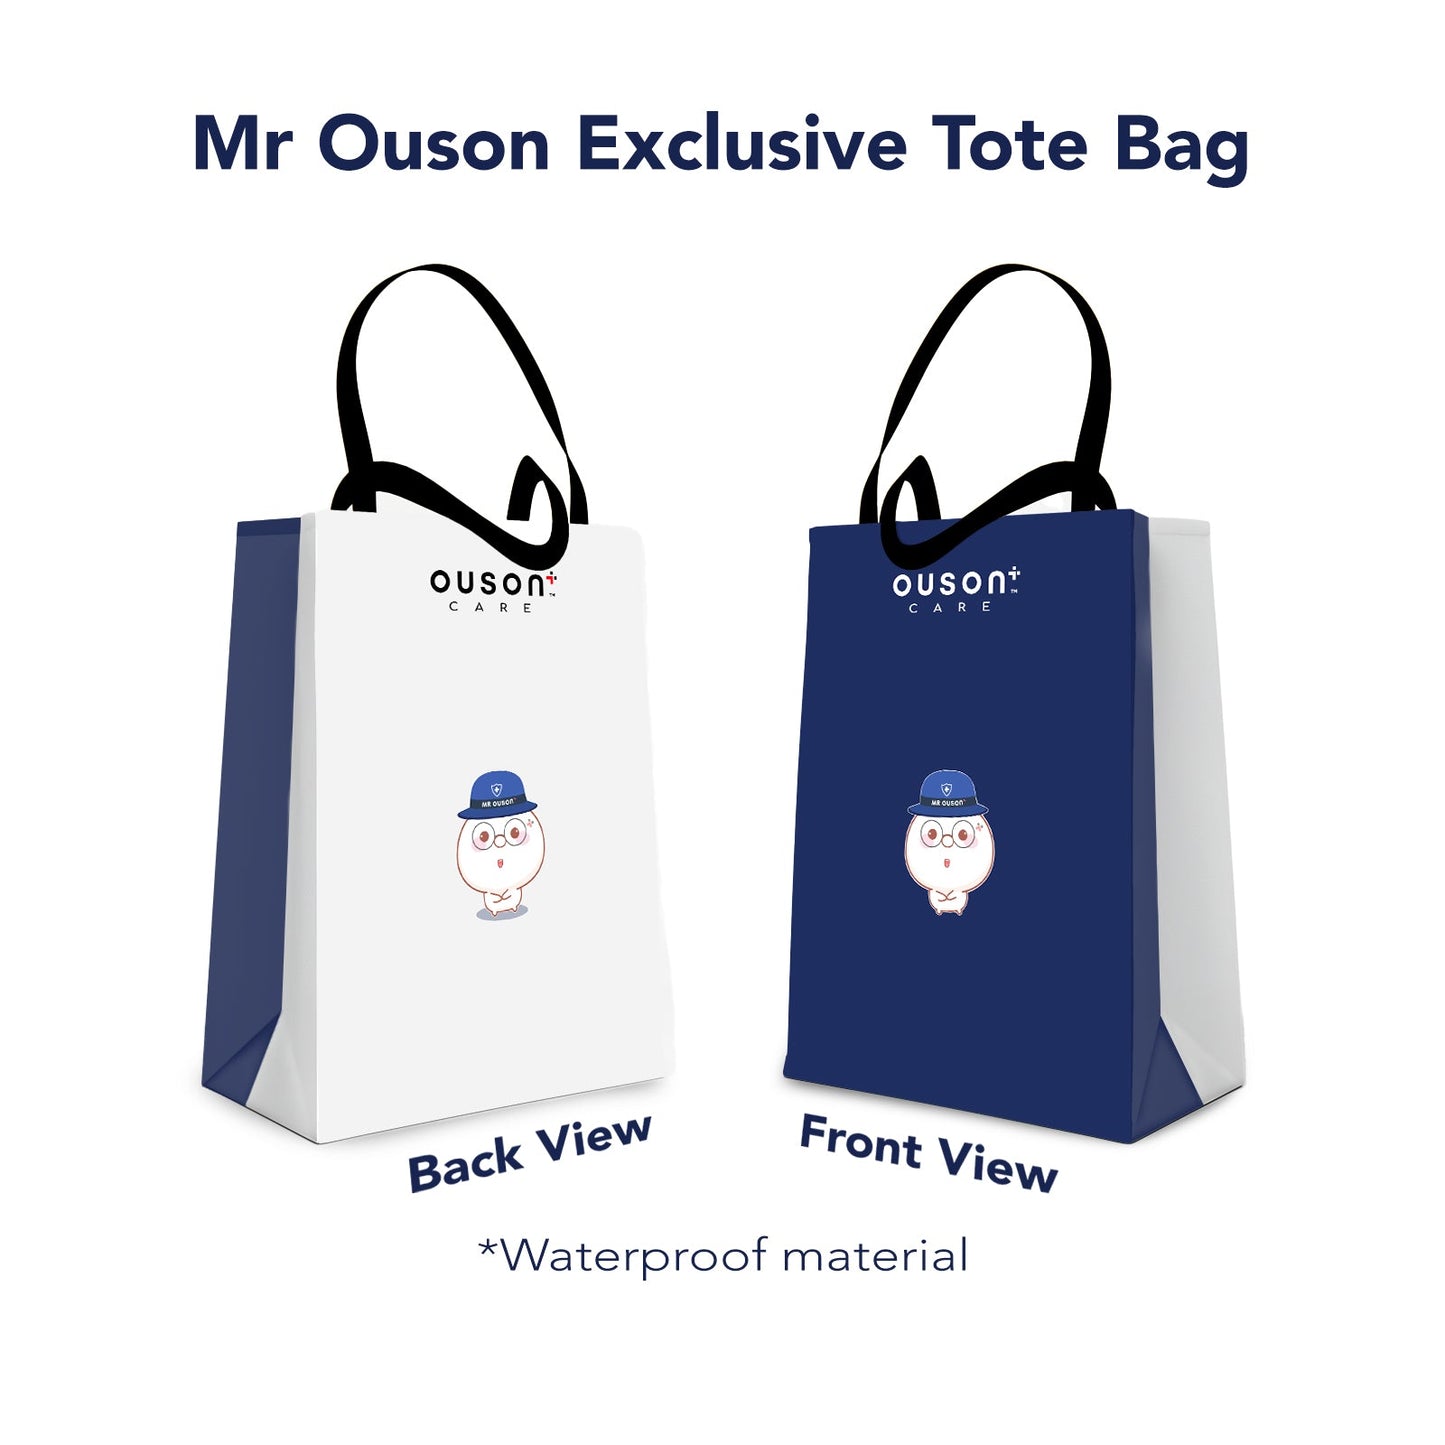 _Gift_Mr Ouson Exclusive Tote Bag